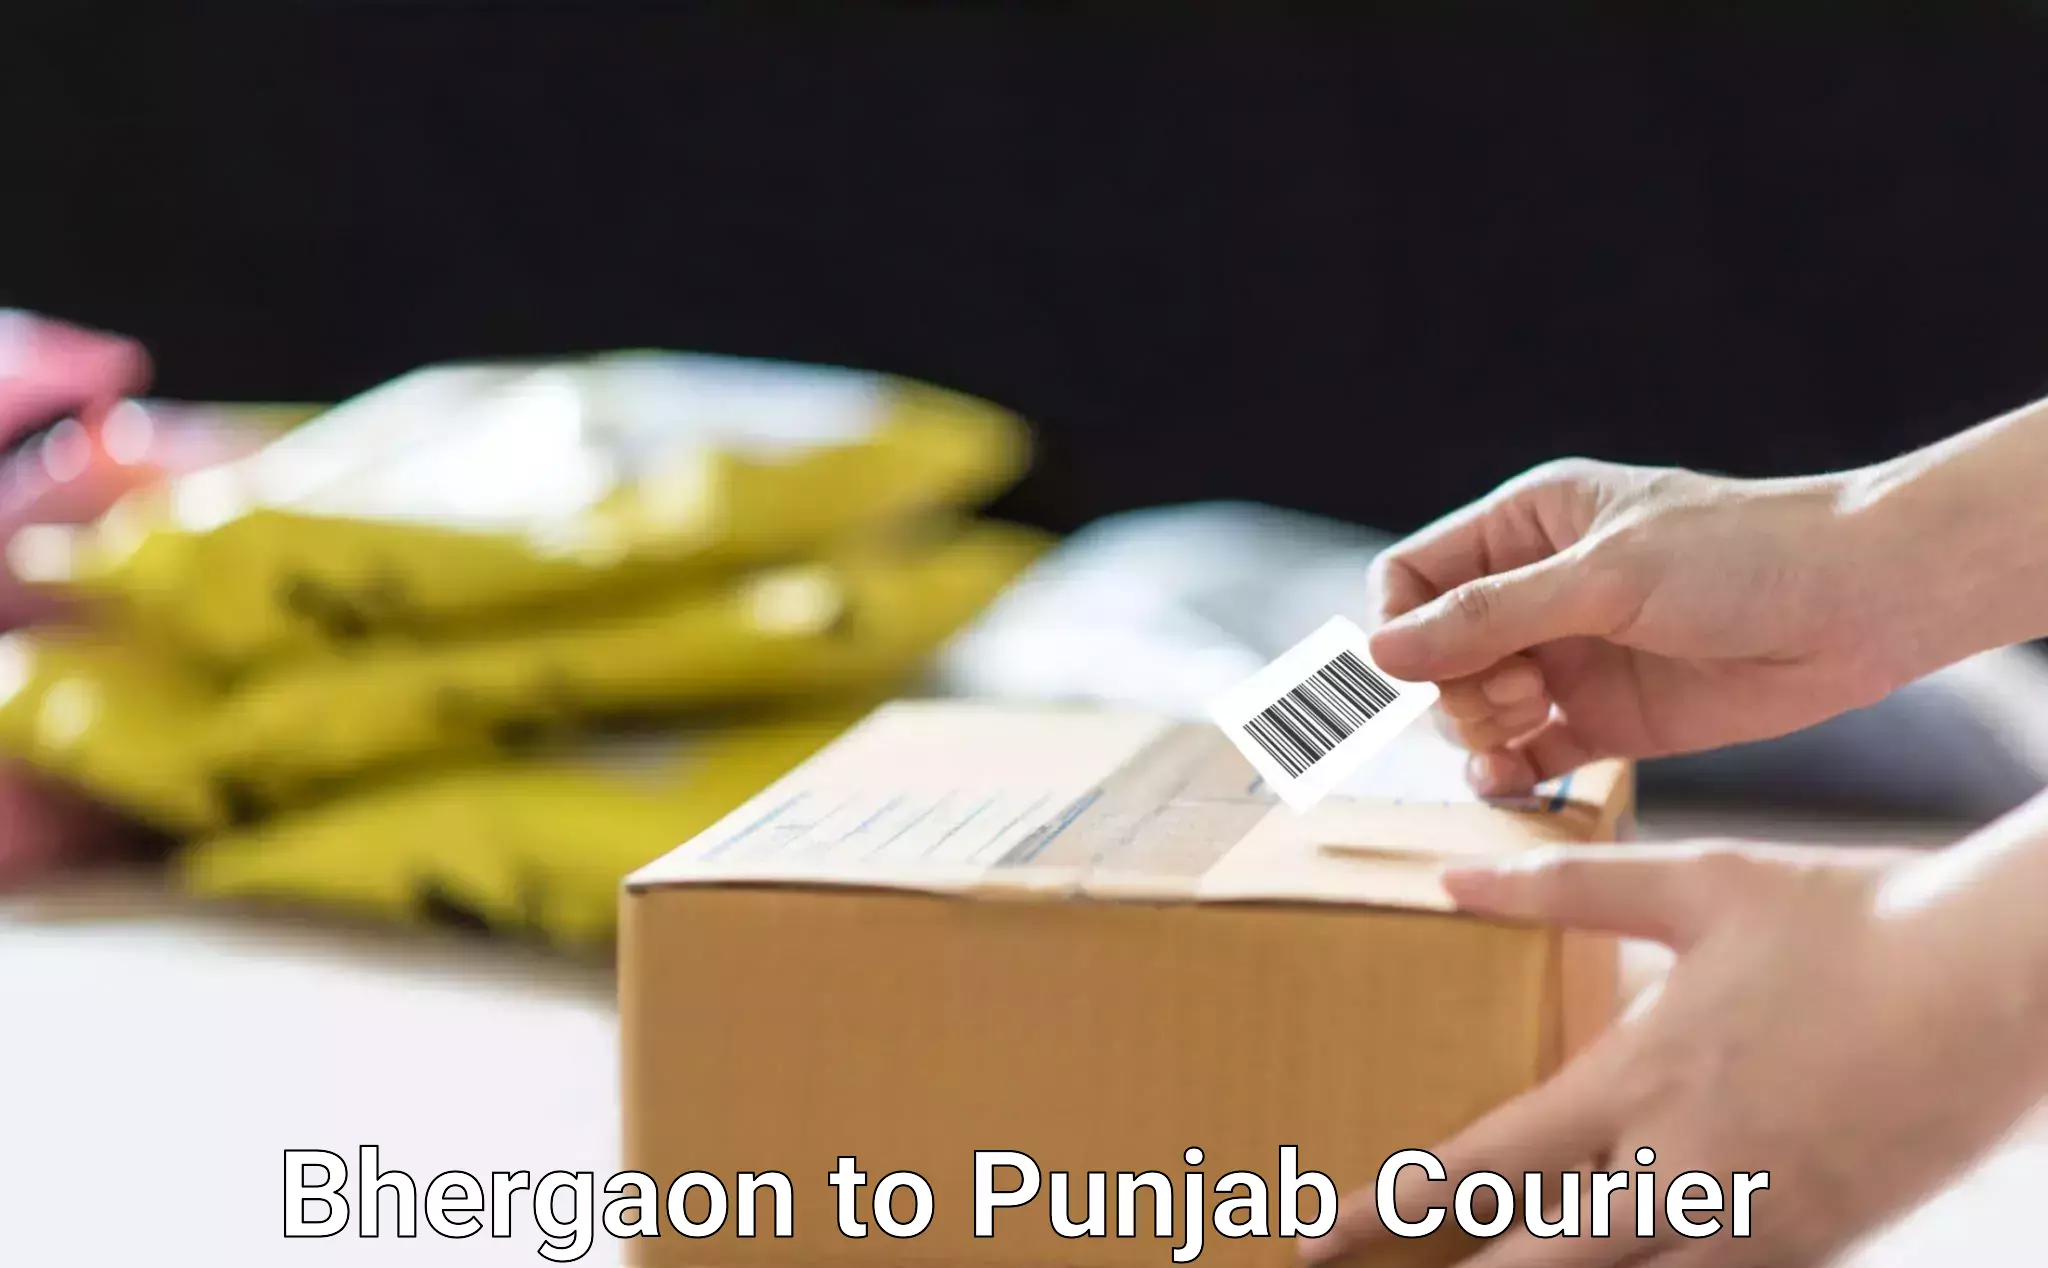 Courier insurance in Bhergaon to Punjab